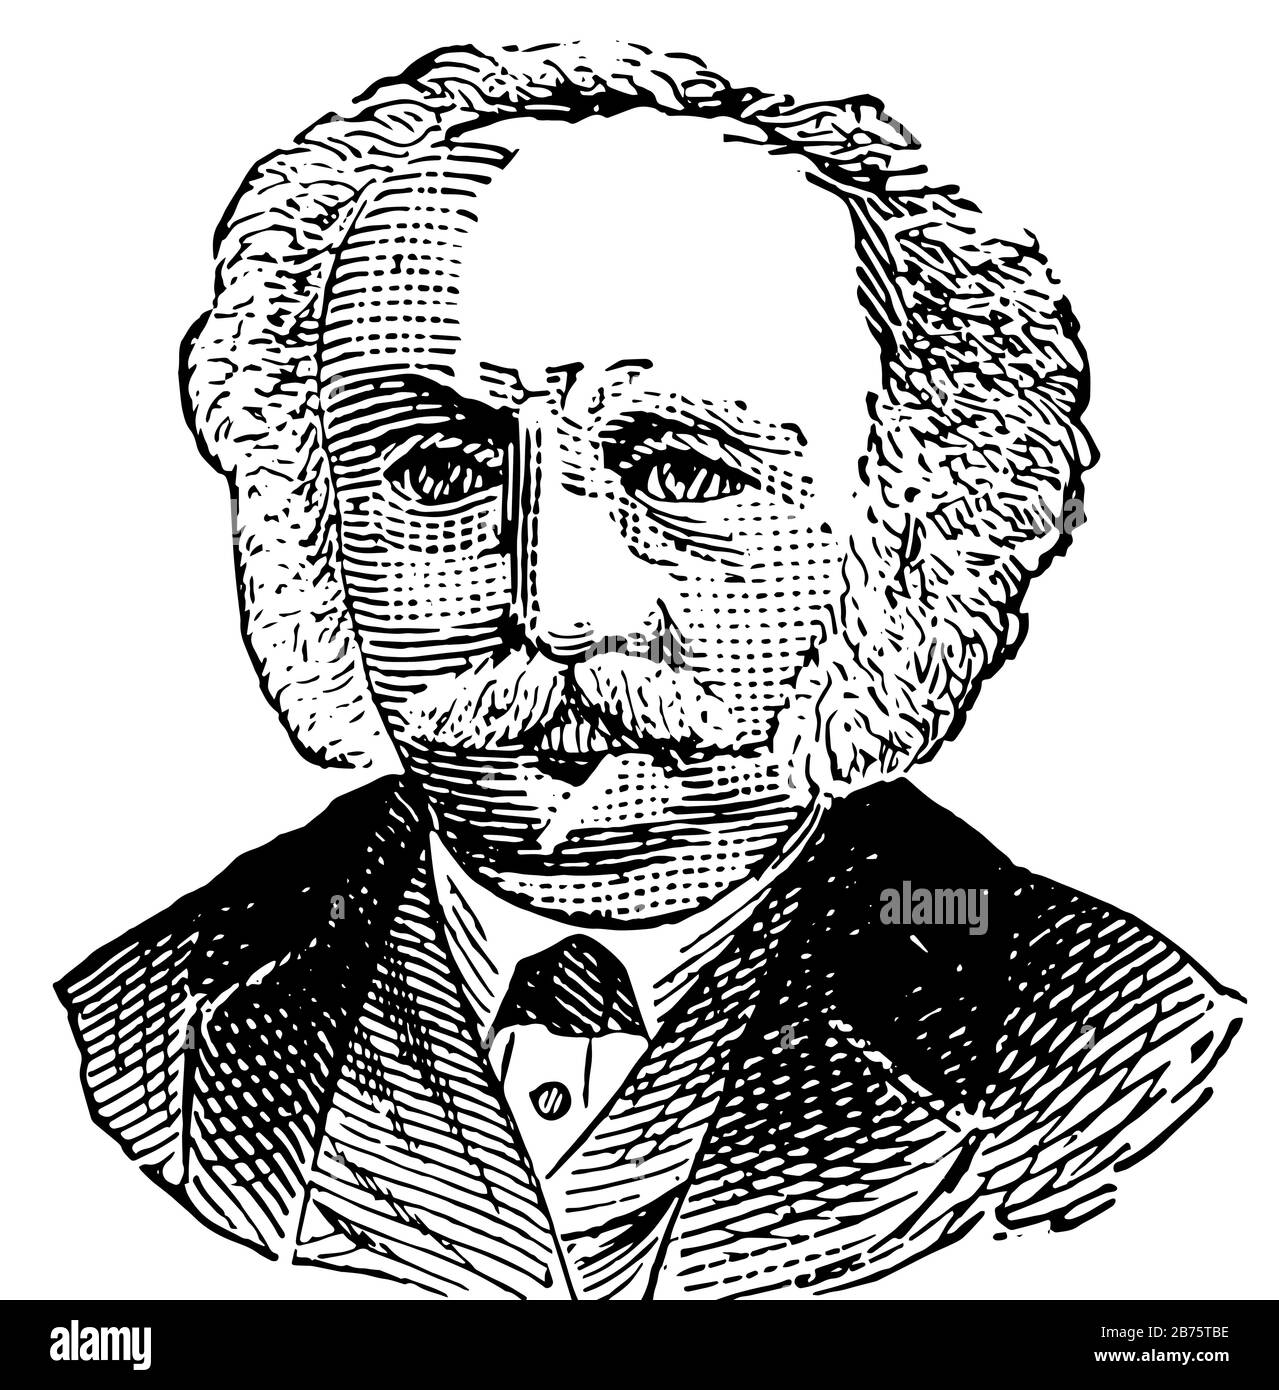 Man's face with mustache and tie in this picture, vintage line drawing or engraving illustration. Stock Vector